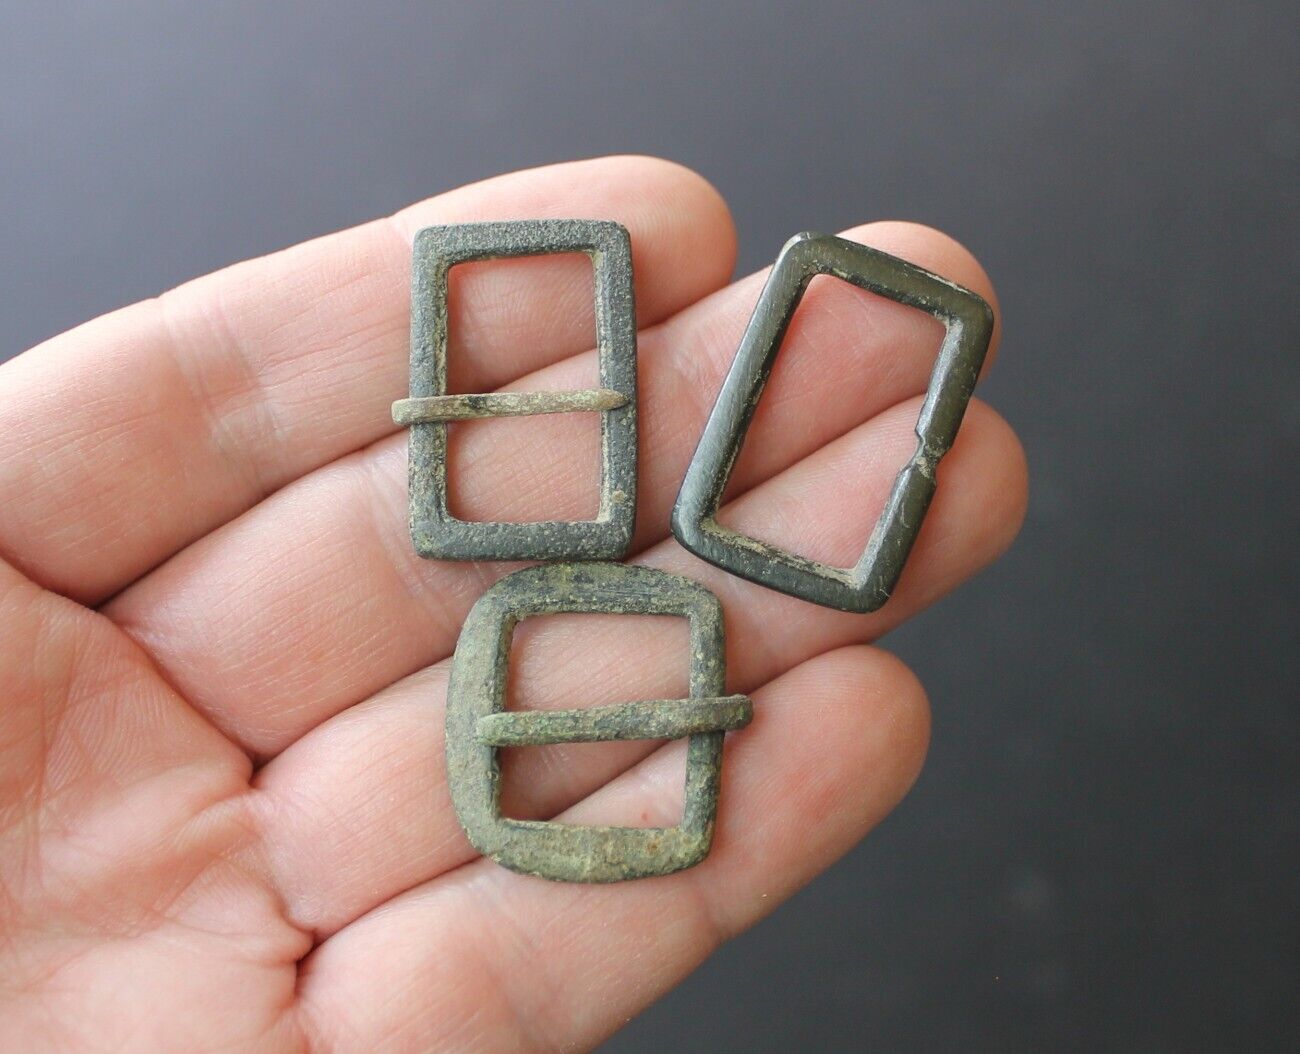 Napoleonic French Cartridge Box buckles 1812 Russian Campaign